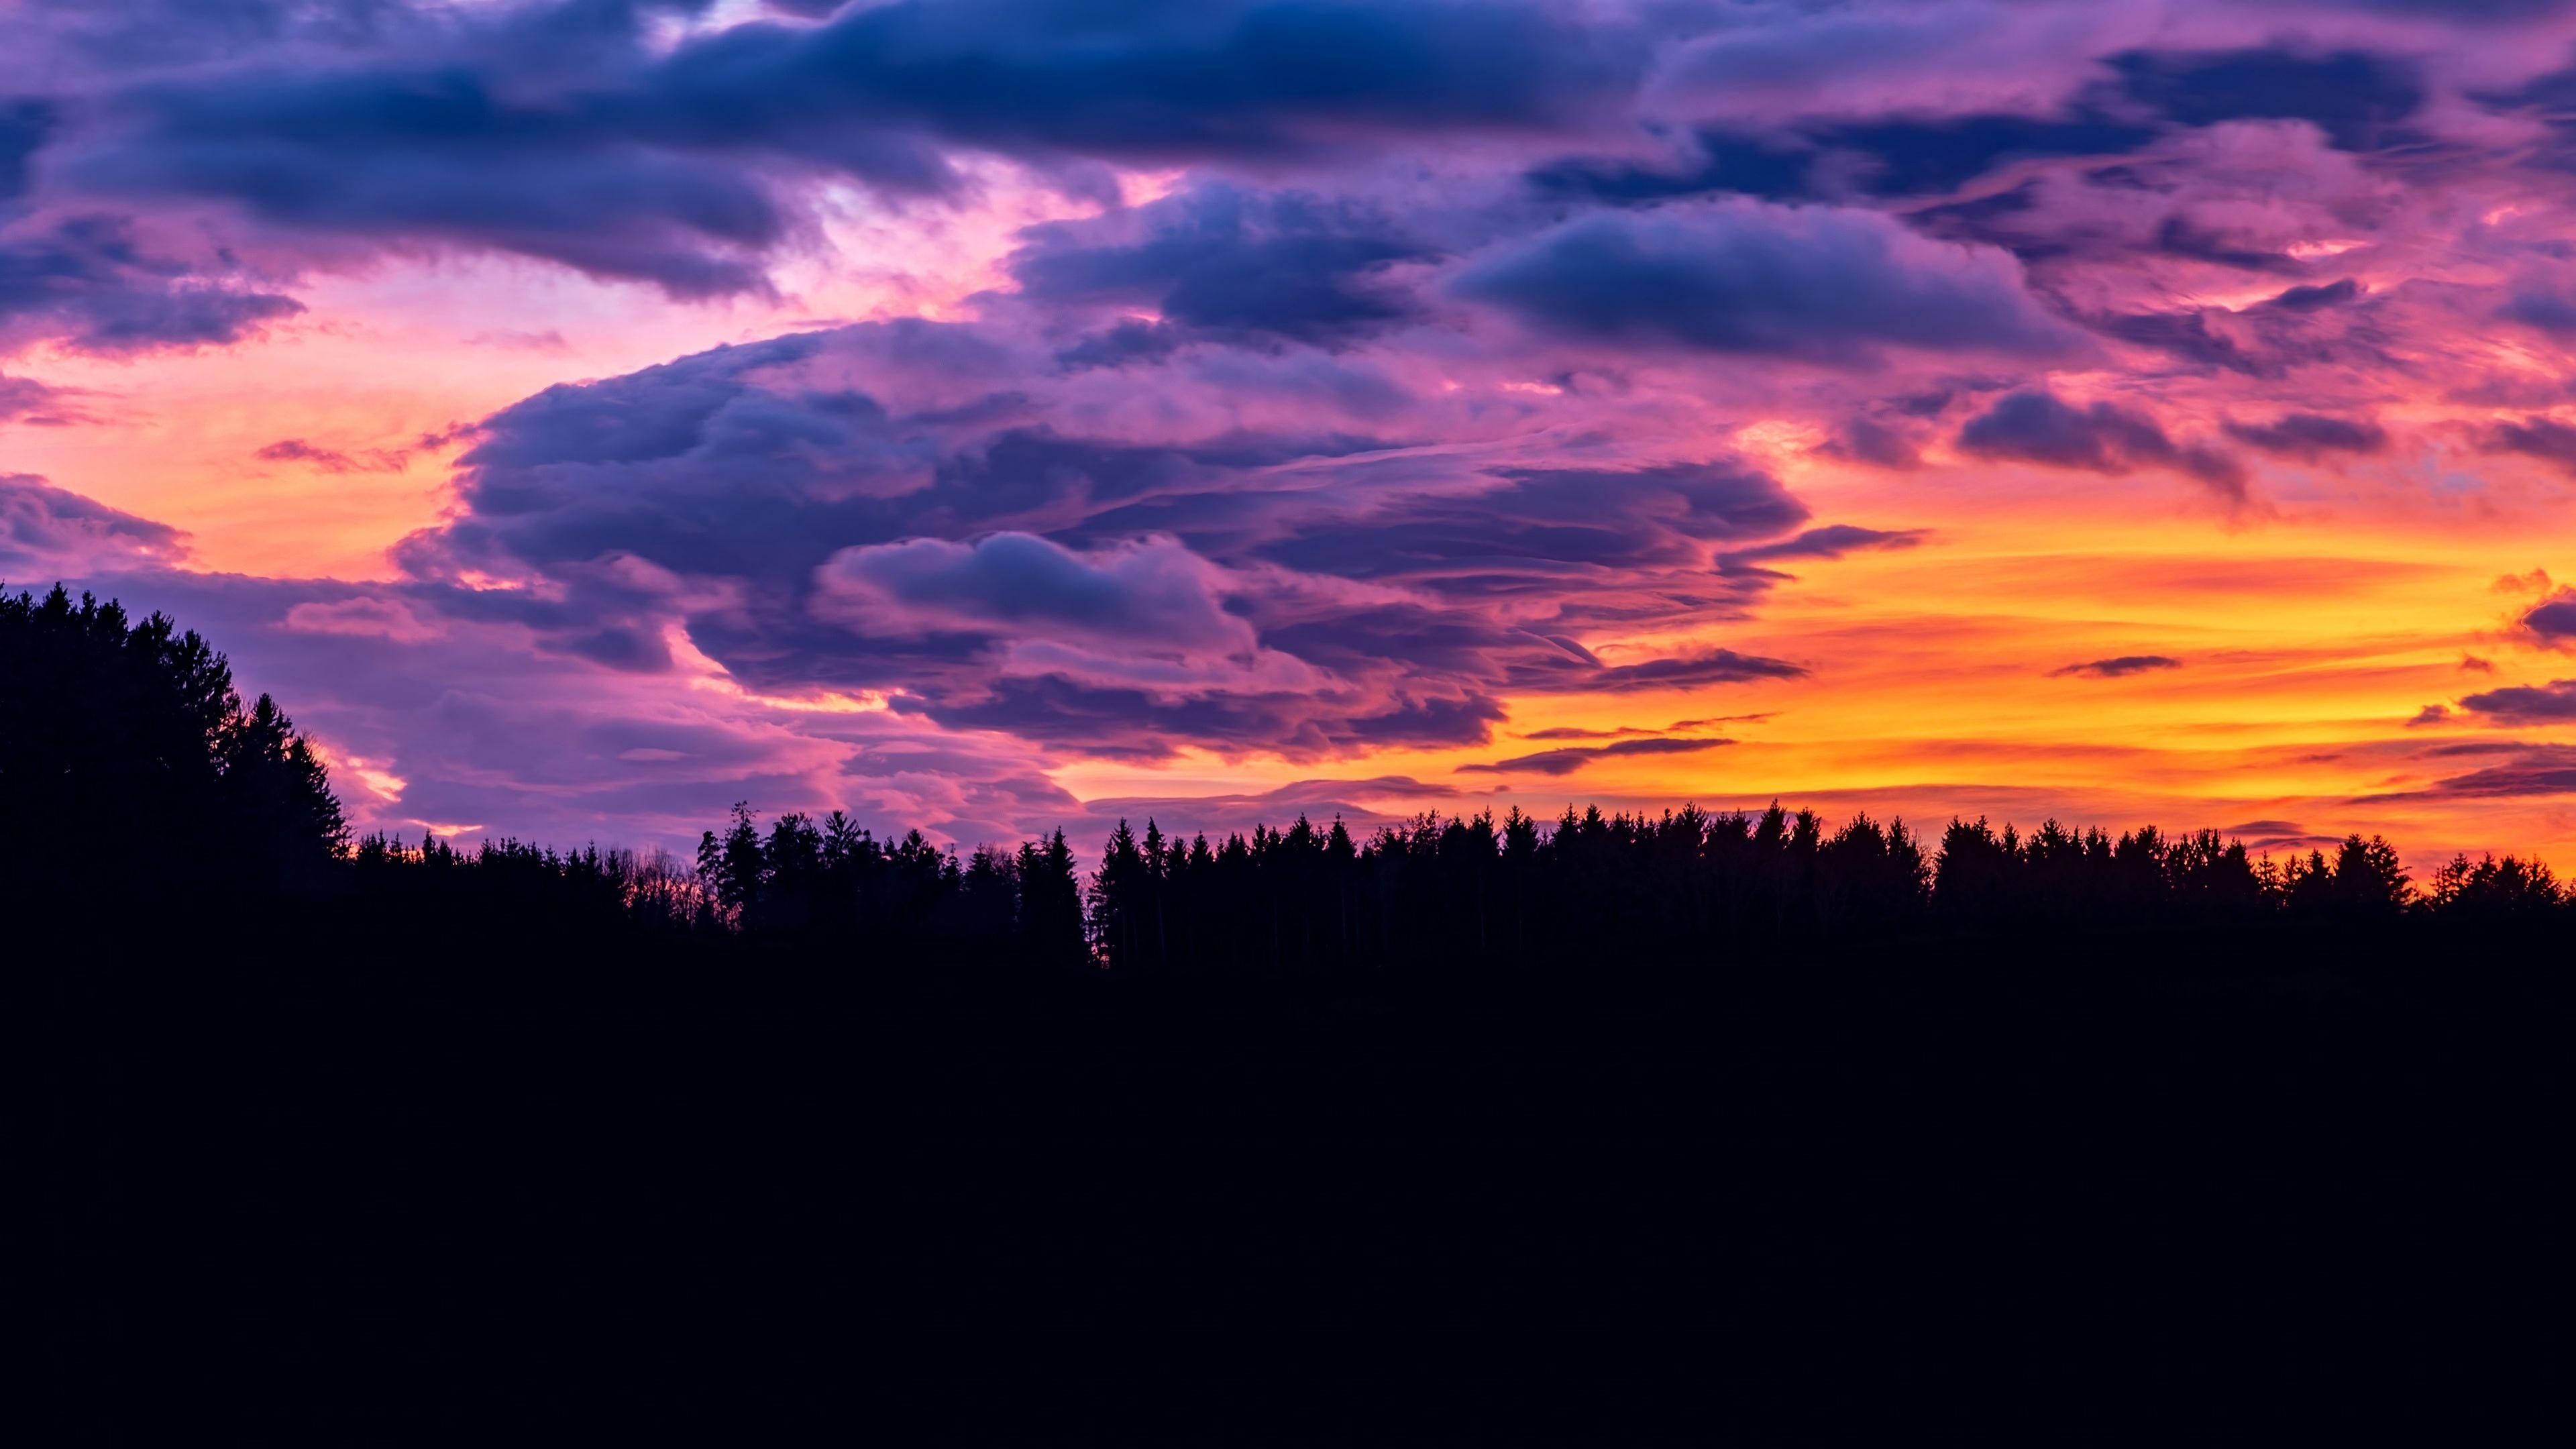 Sunset Clouds Hd Wallpapers Top Free Sunset Clouds Hd Backgrounds Wallpaperaccess